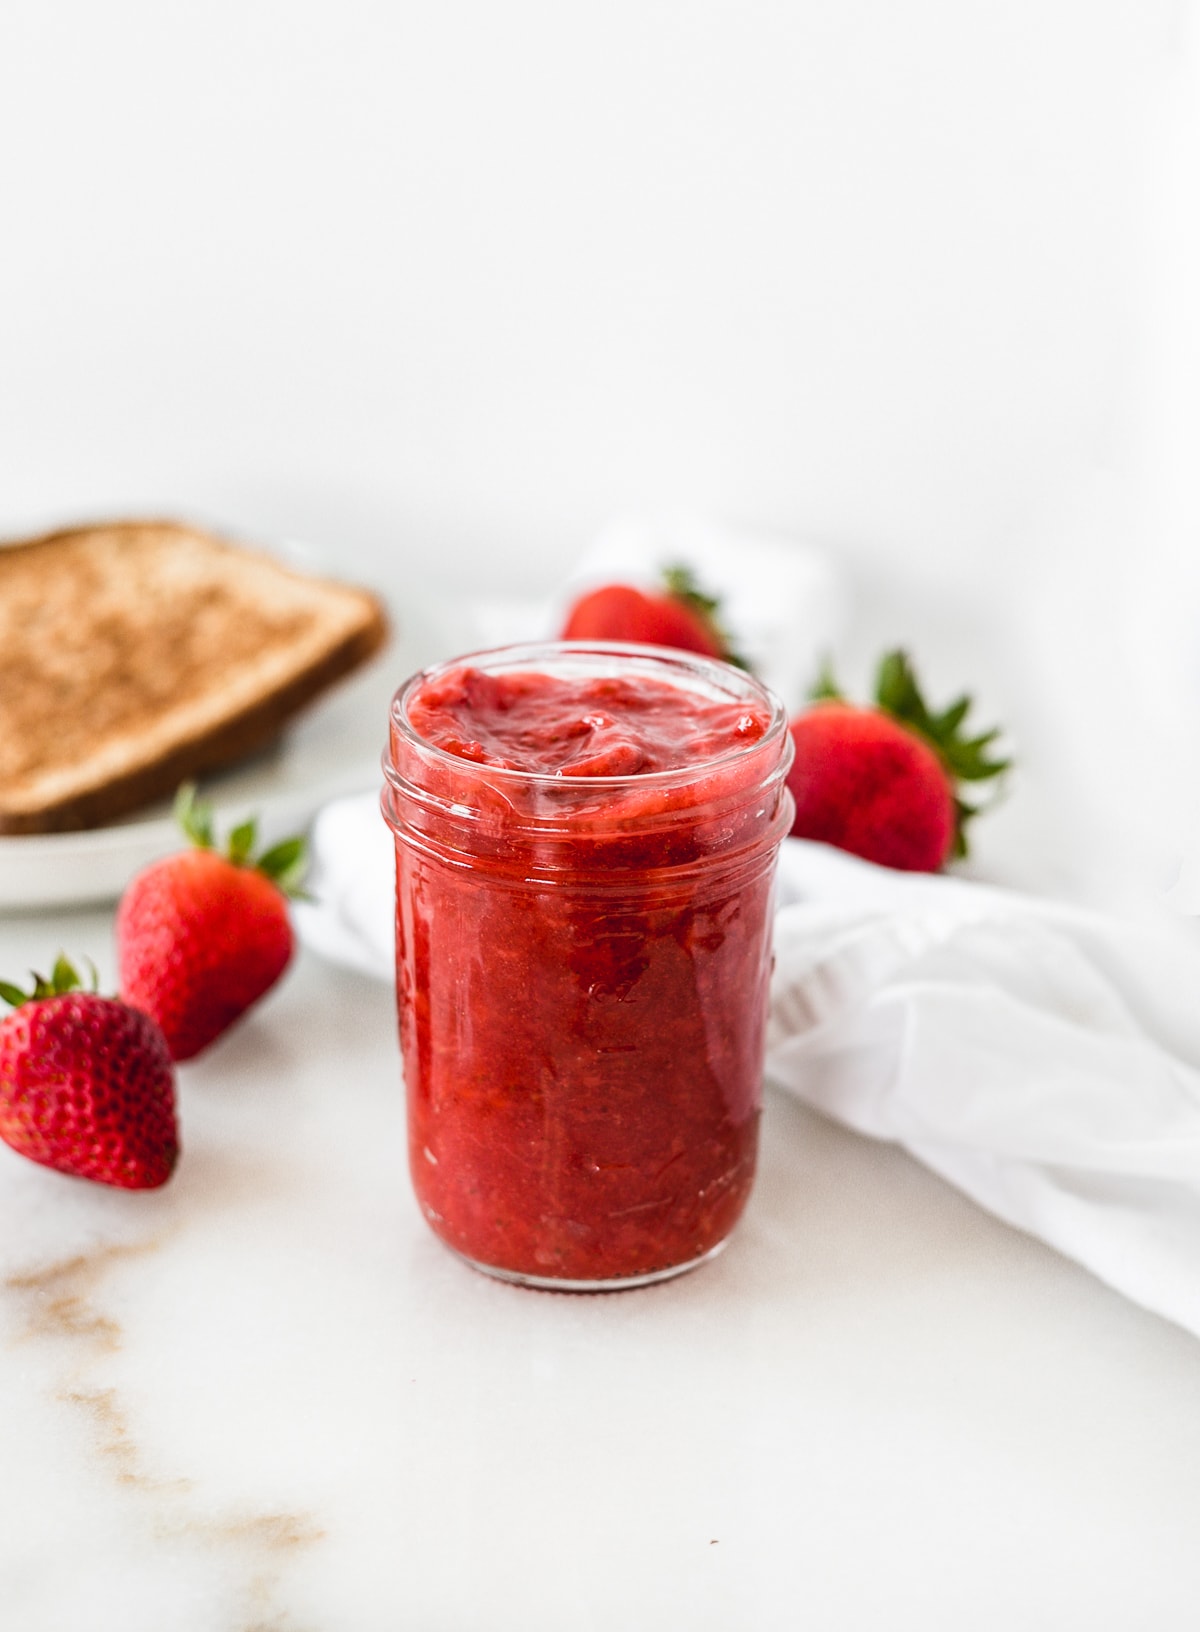 strawberry jam in a glass jar with strawberries and toast behind it.